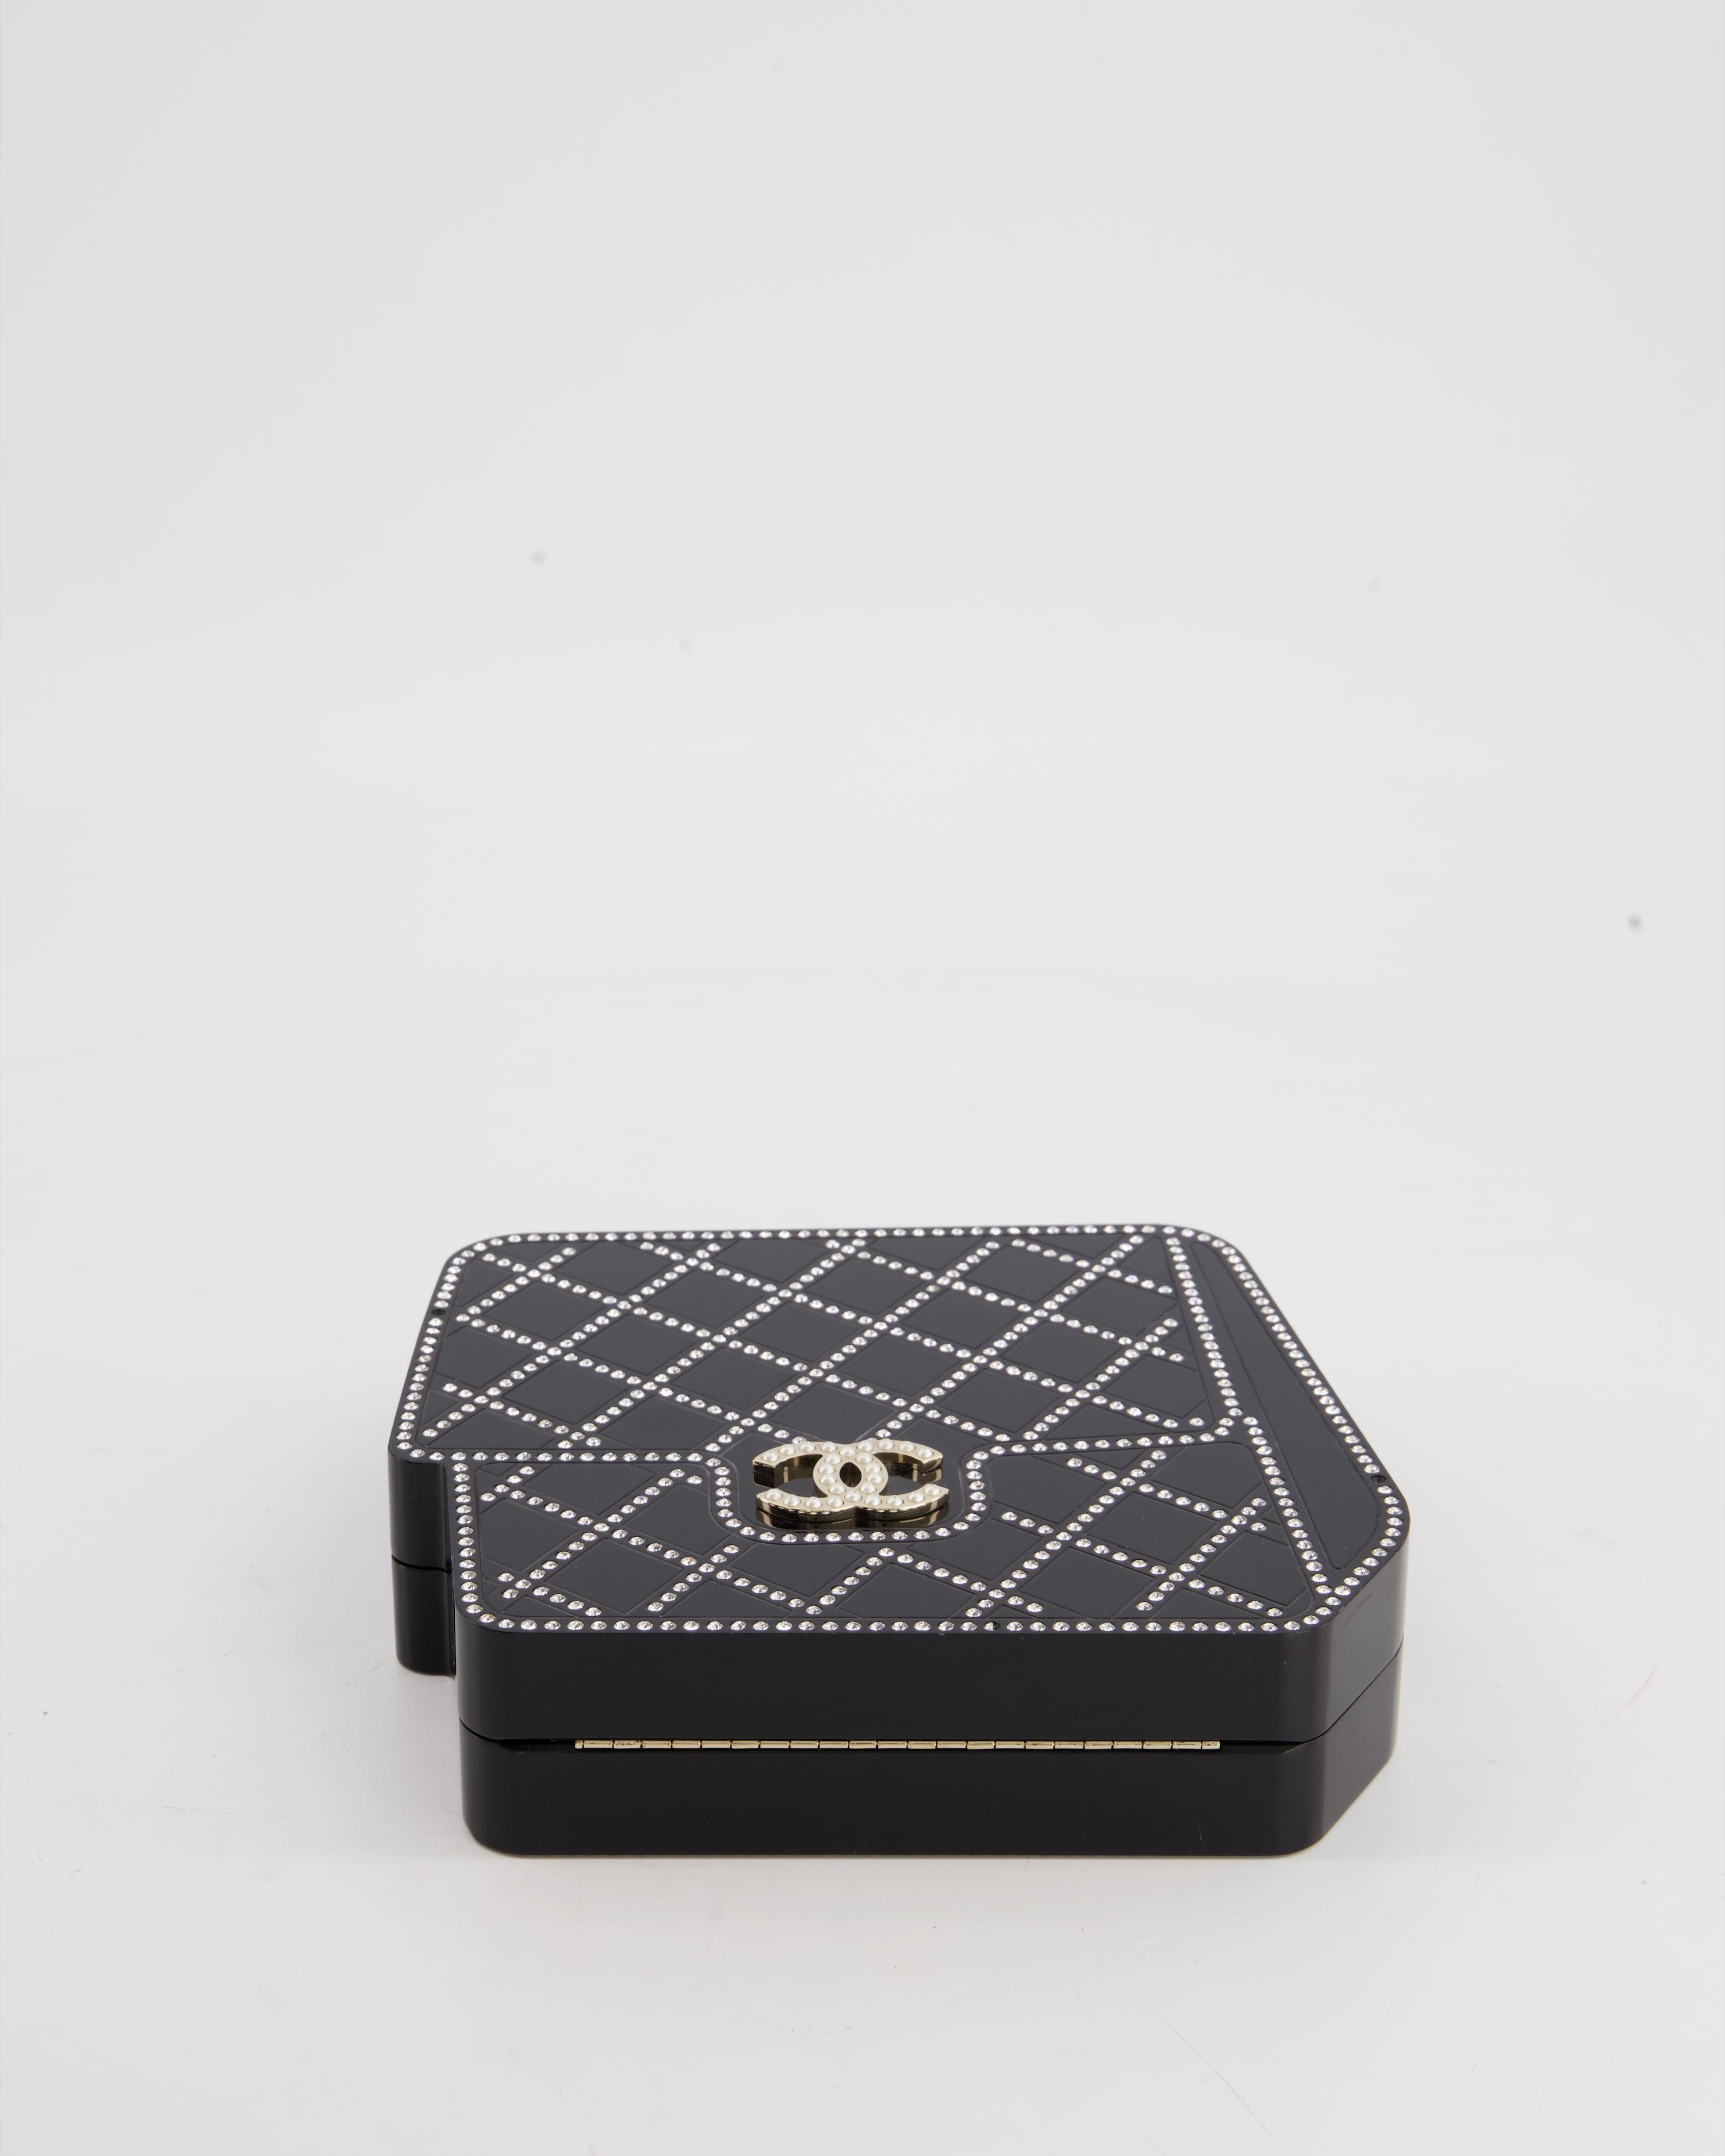 *COLLECTORS ITEM* Chanel Black Acrylic Crossbody Box Bag with Crystal with Pearl Embellishment and Champagne Gold Hardware